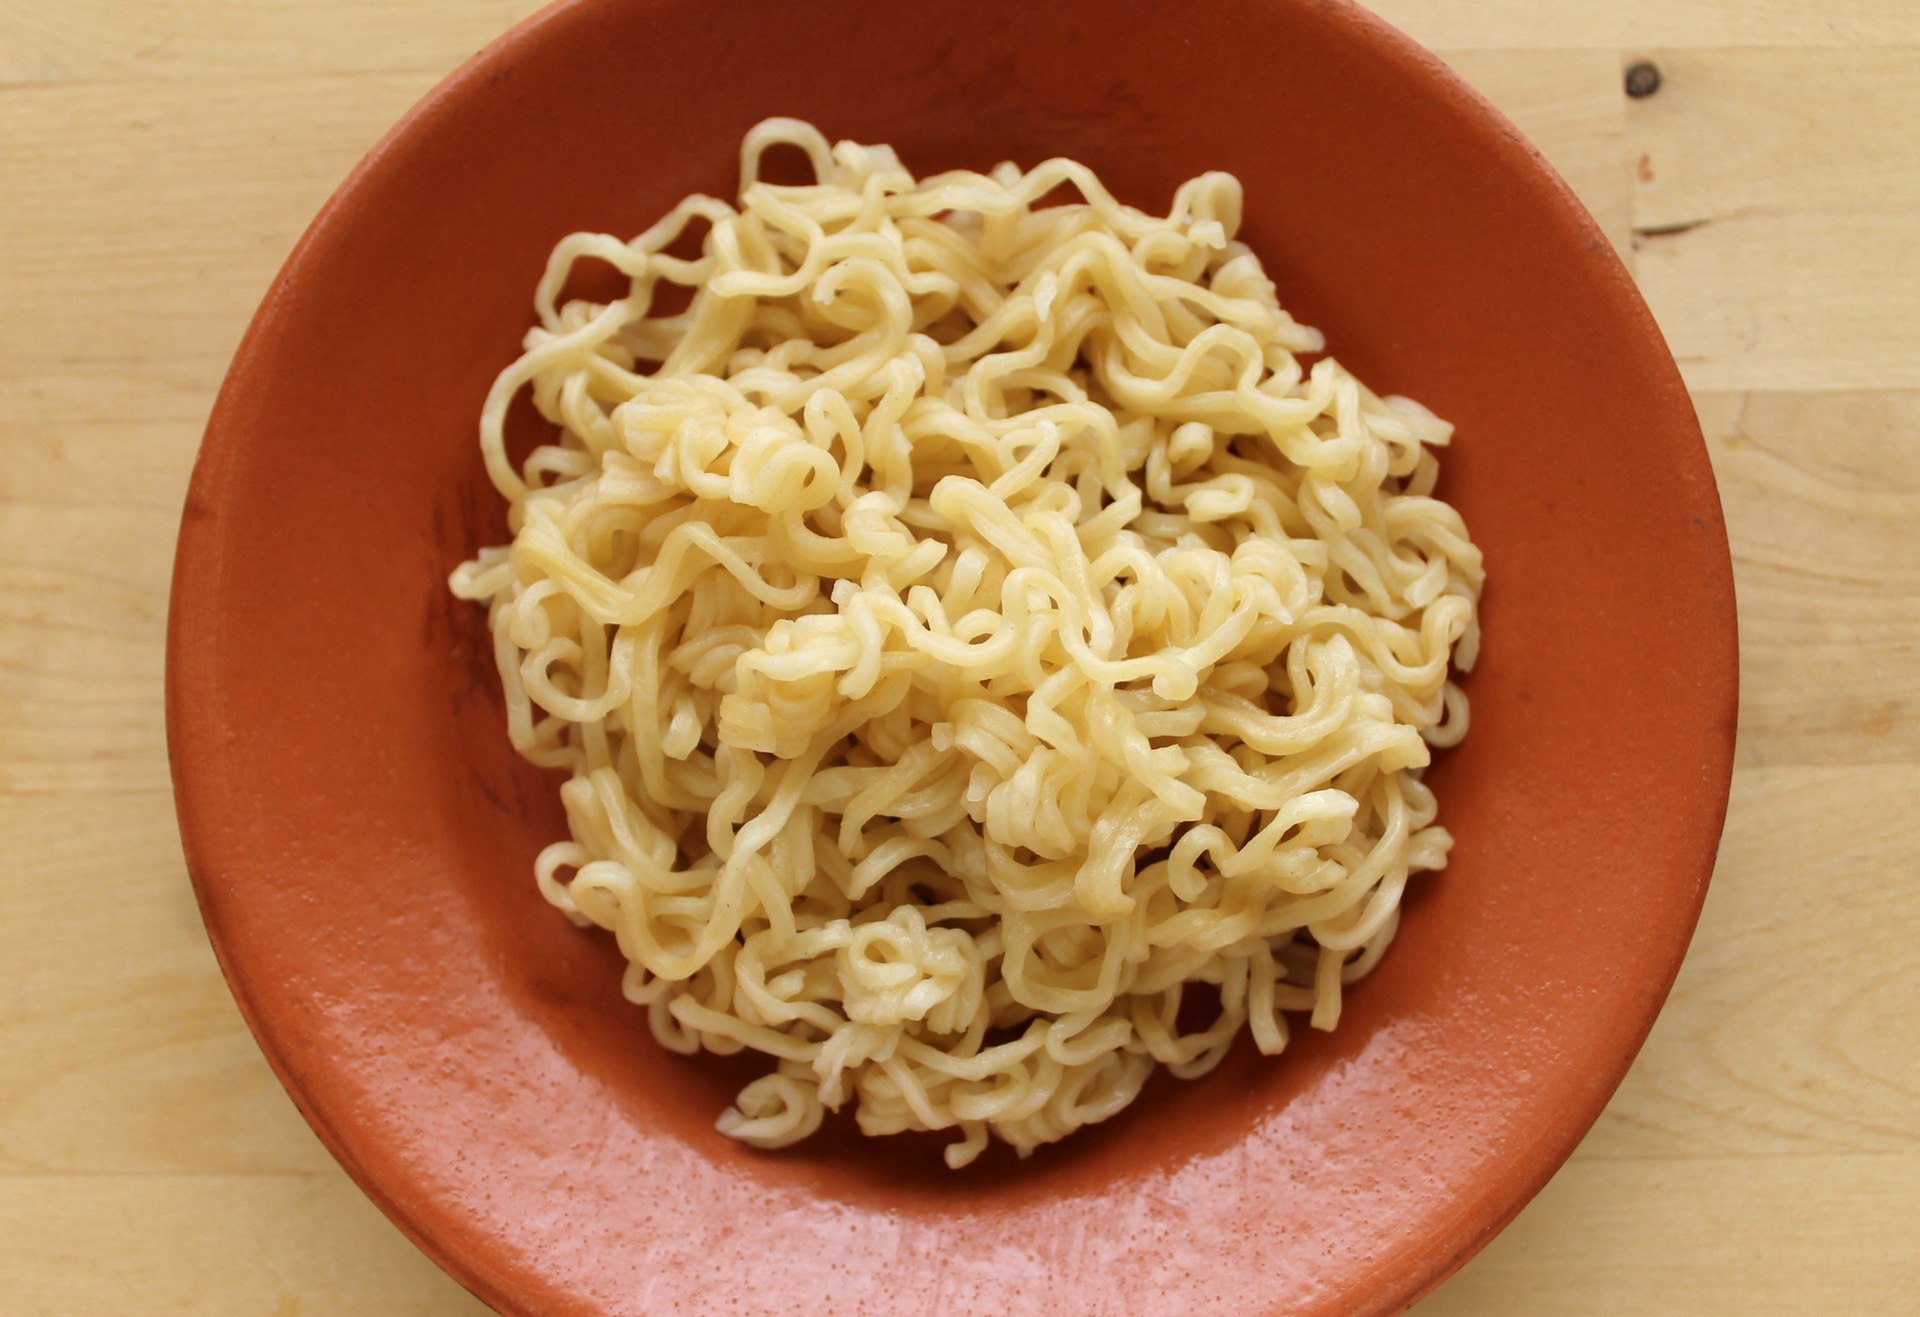 Sapporo is a classic, well-rated brand of instant ramen.